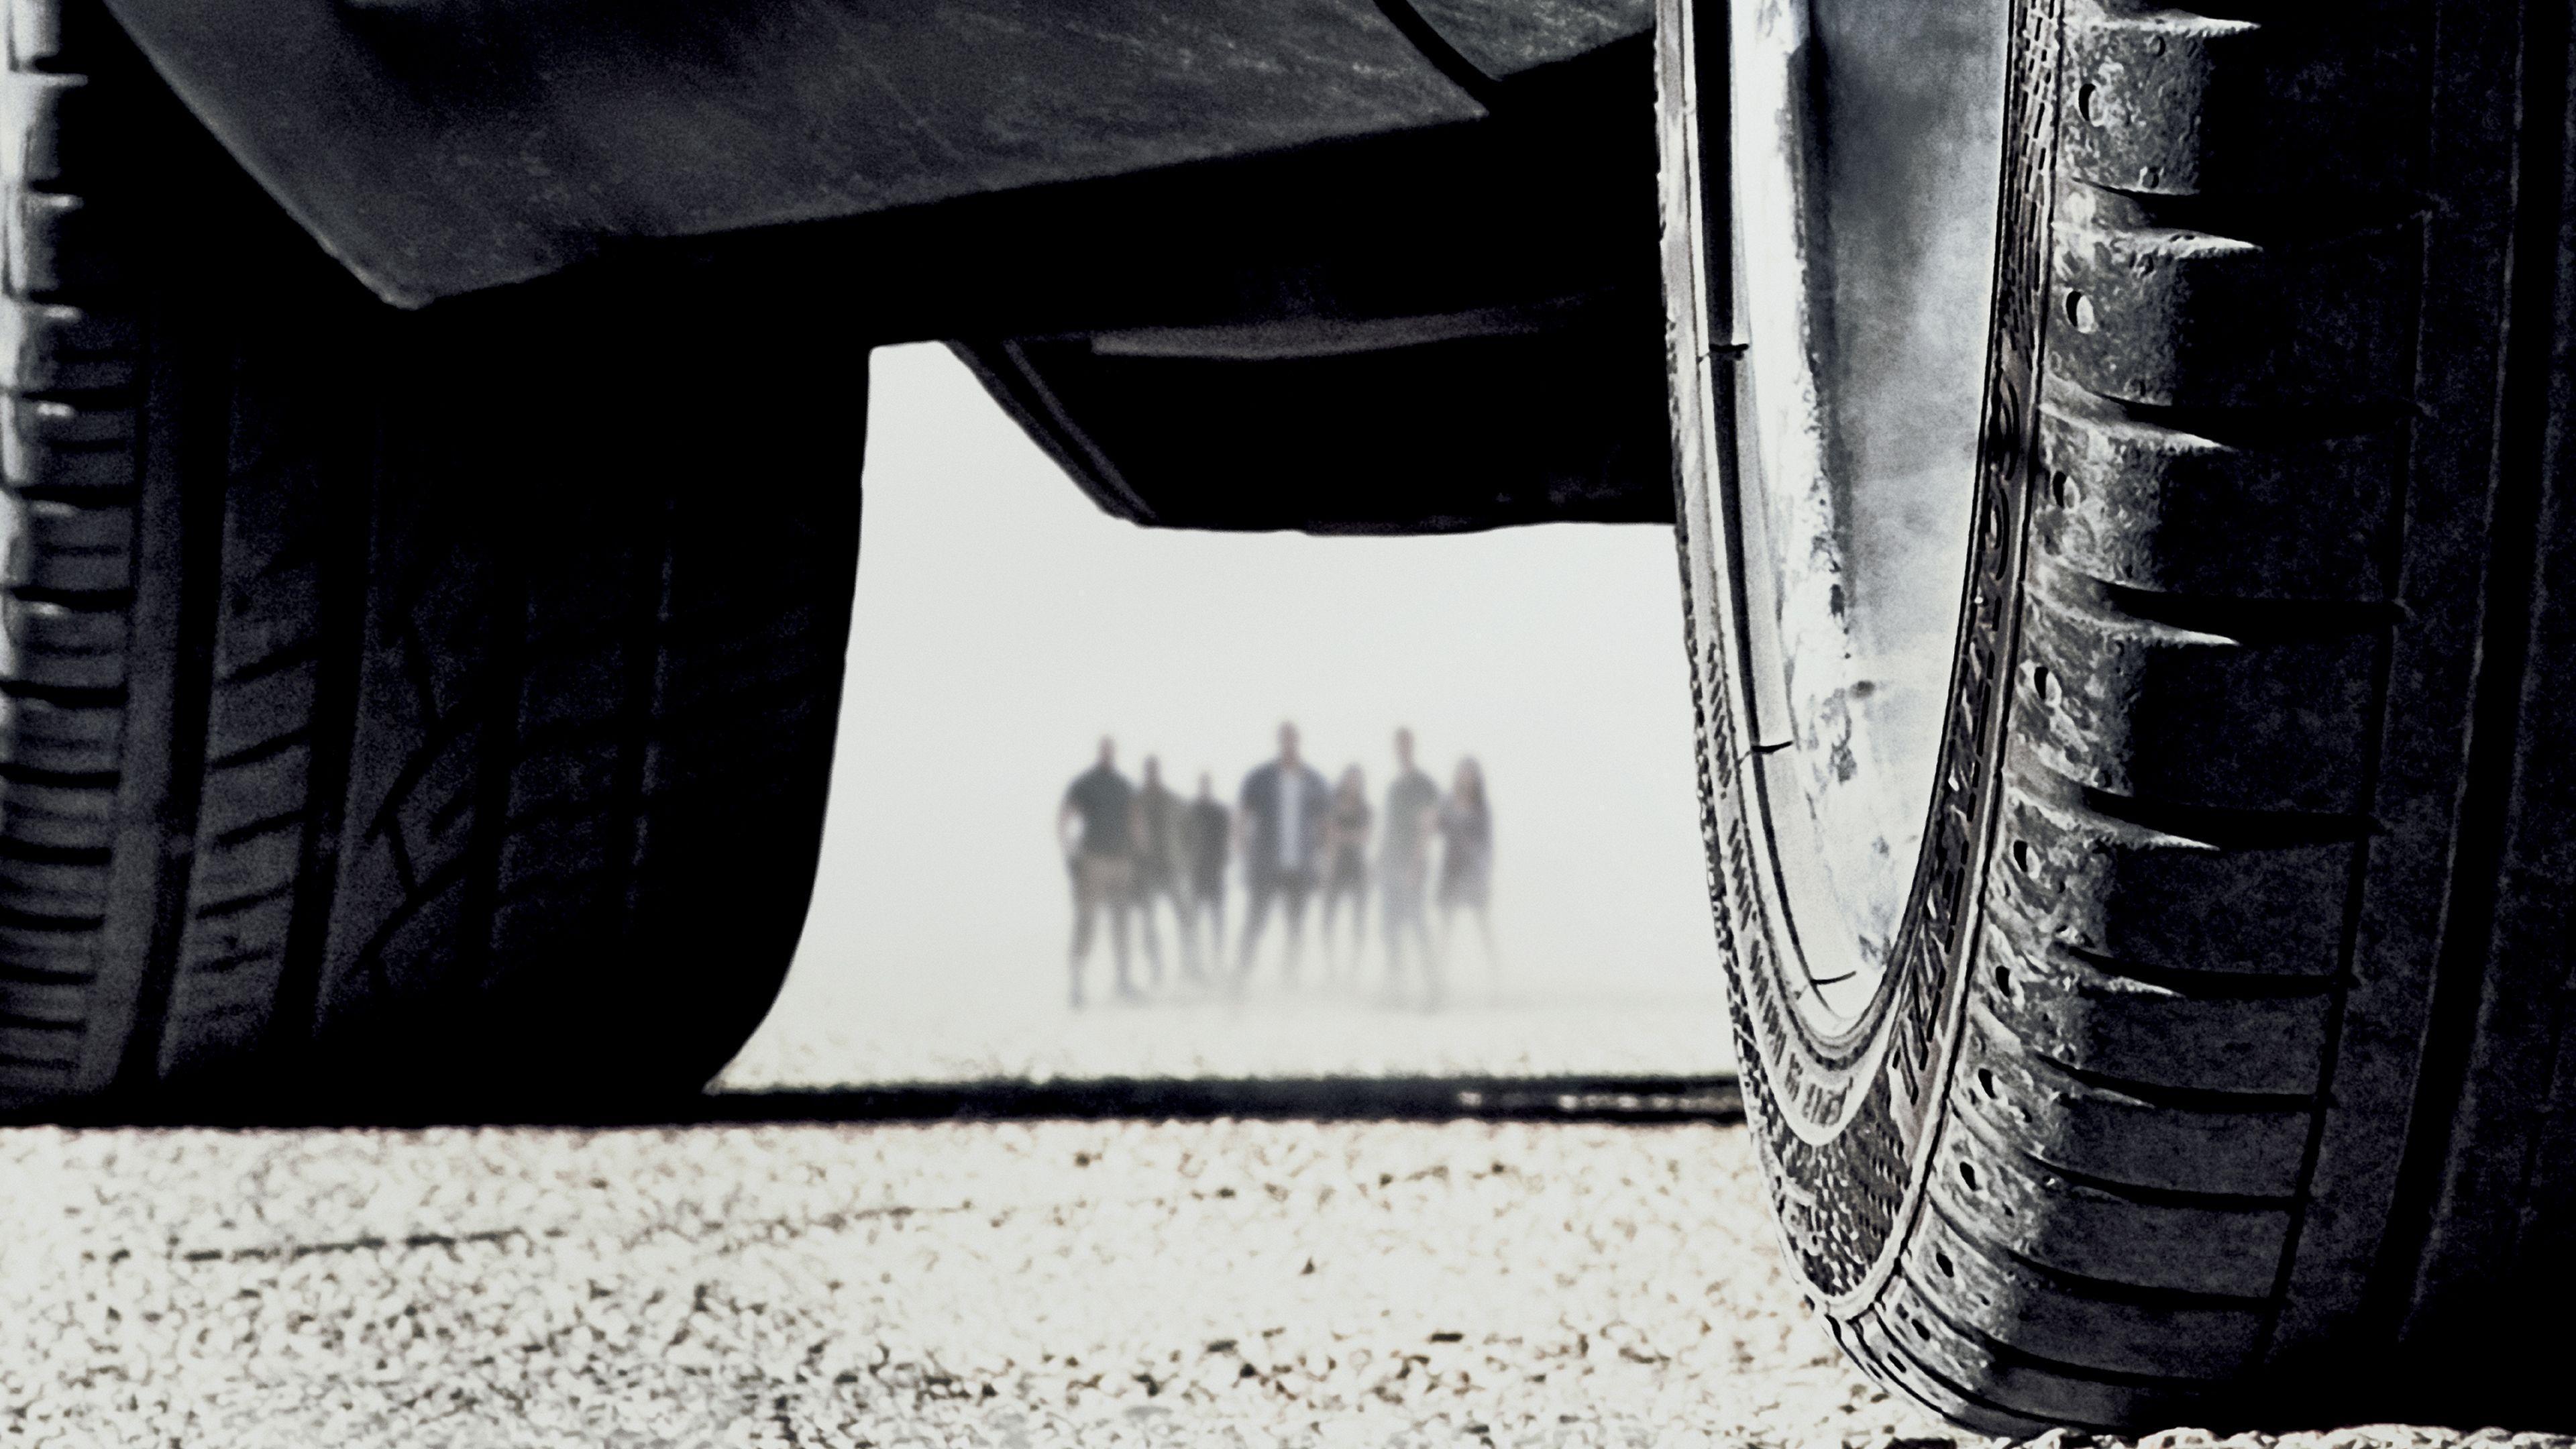 76 Furious 7 HD Wallpapers